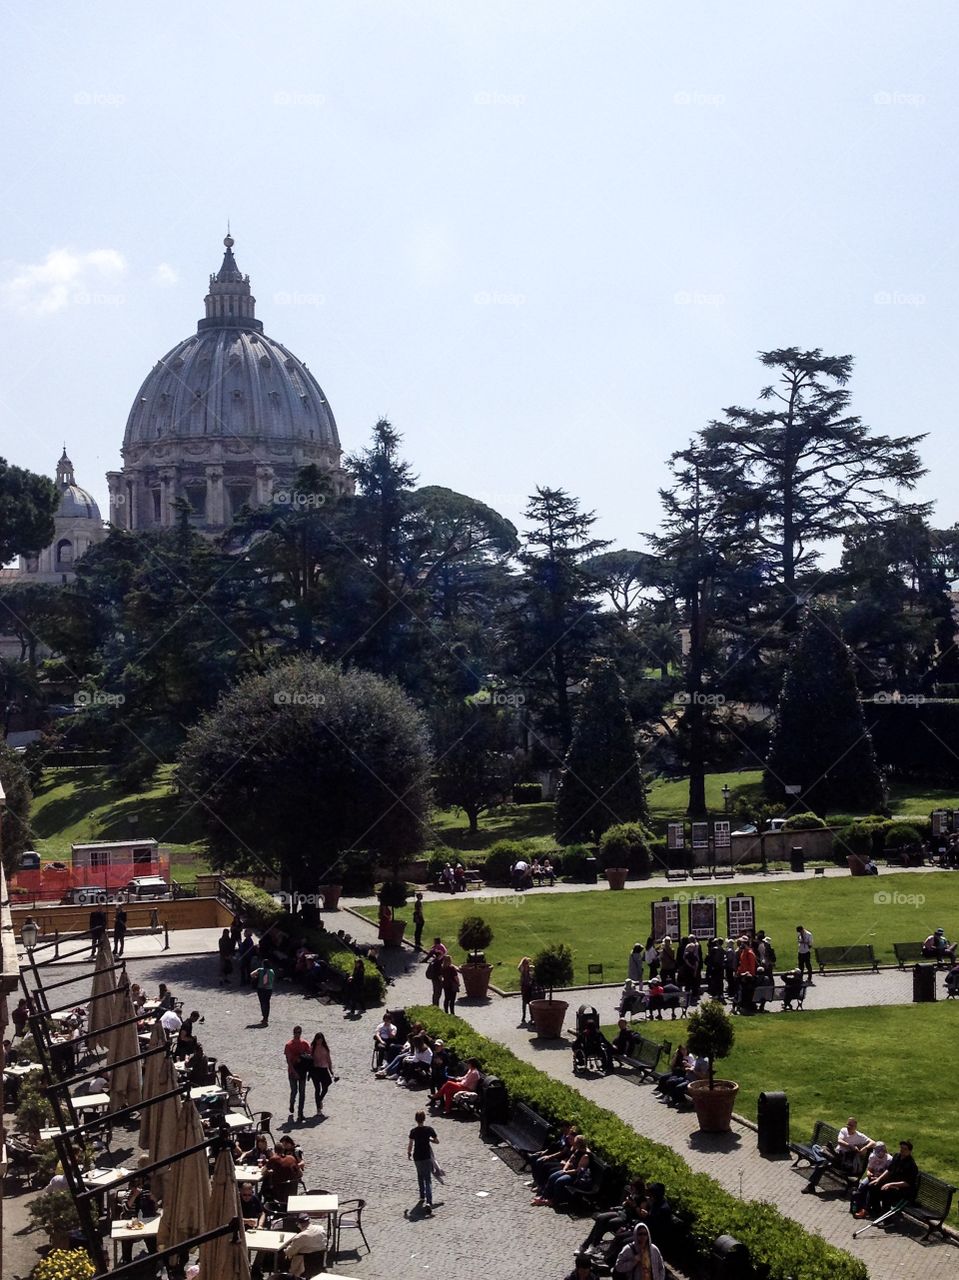 Vatican. The the museums of the Vatican. The courtyard view. The view of the cathedral of saint peter.